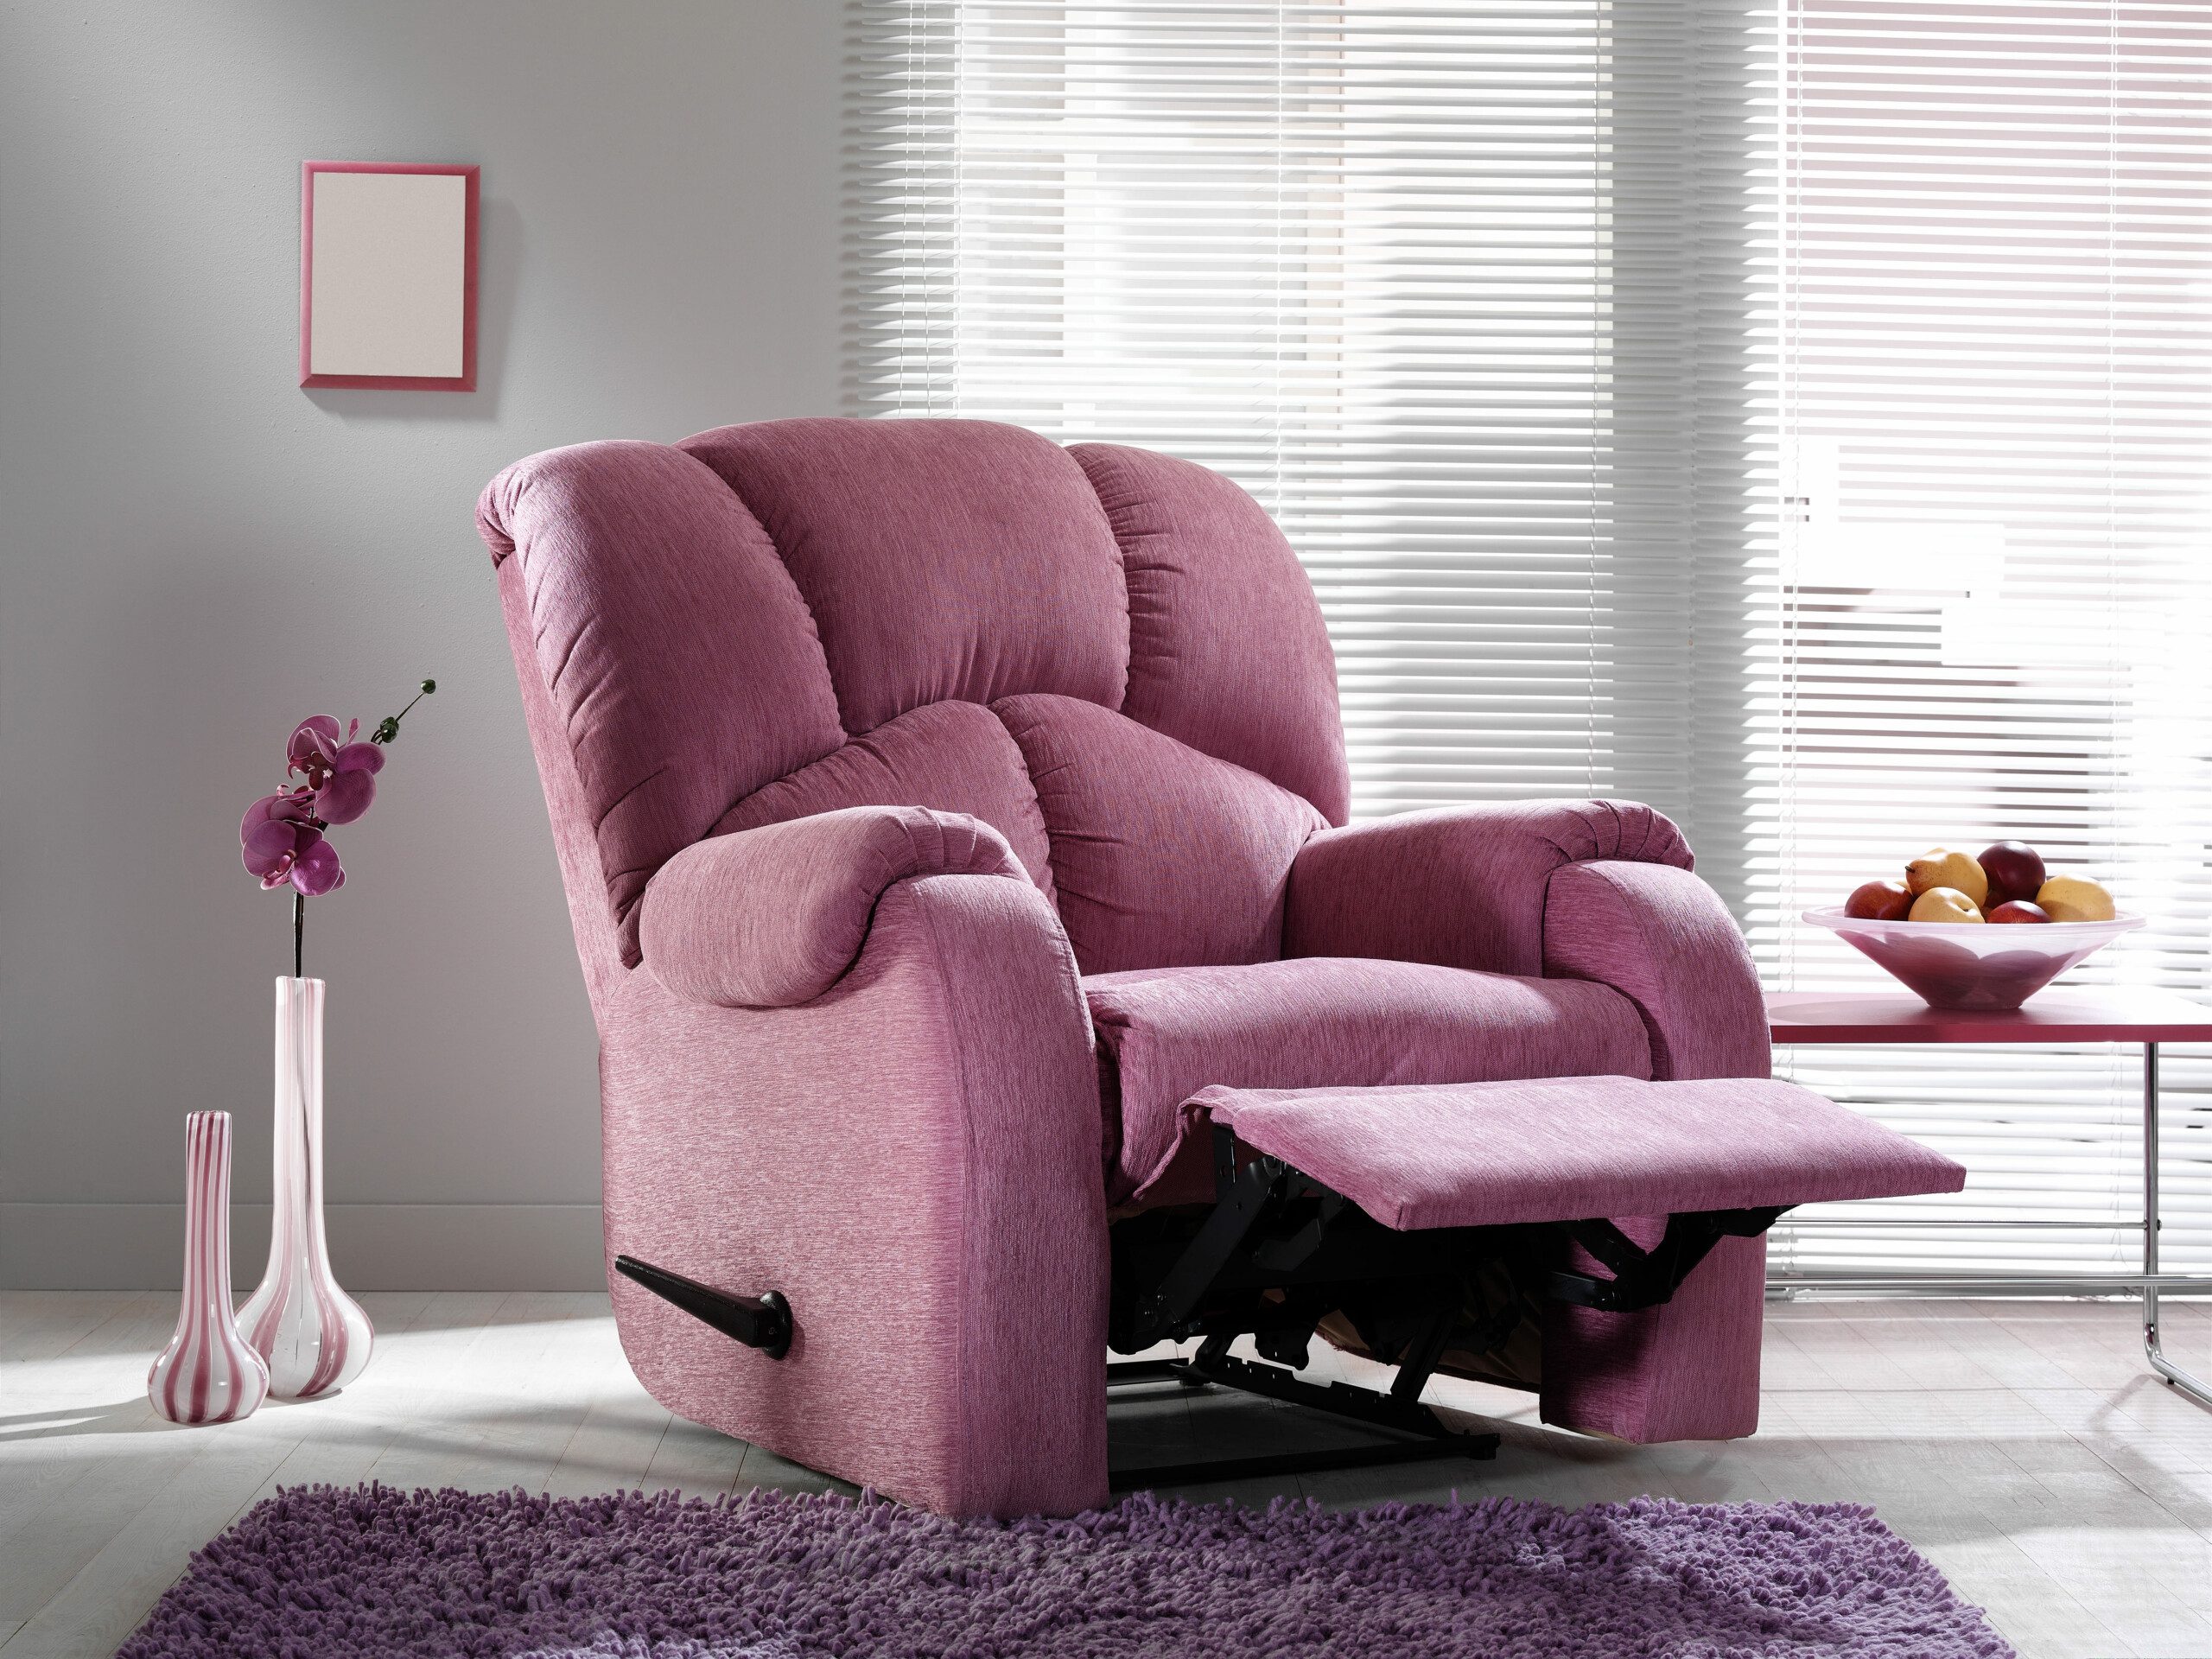 Image of a pink model reclining armchair in a living room. 